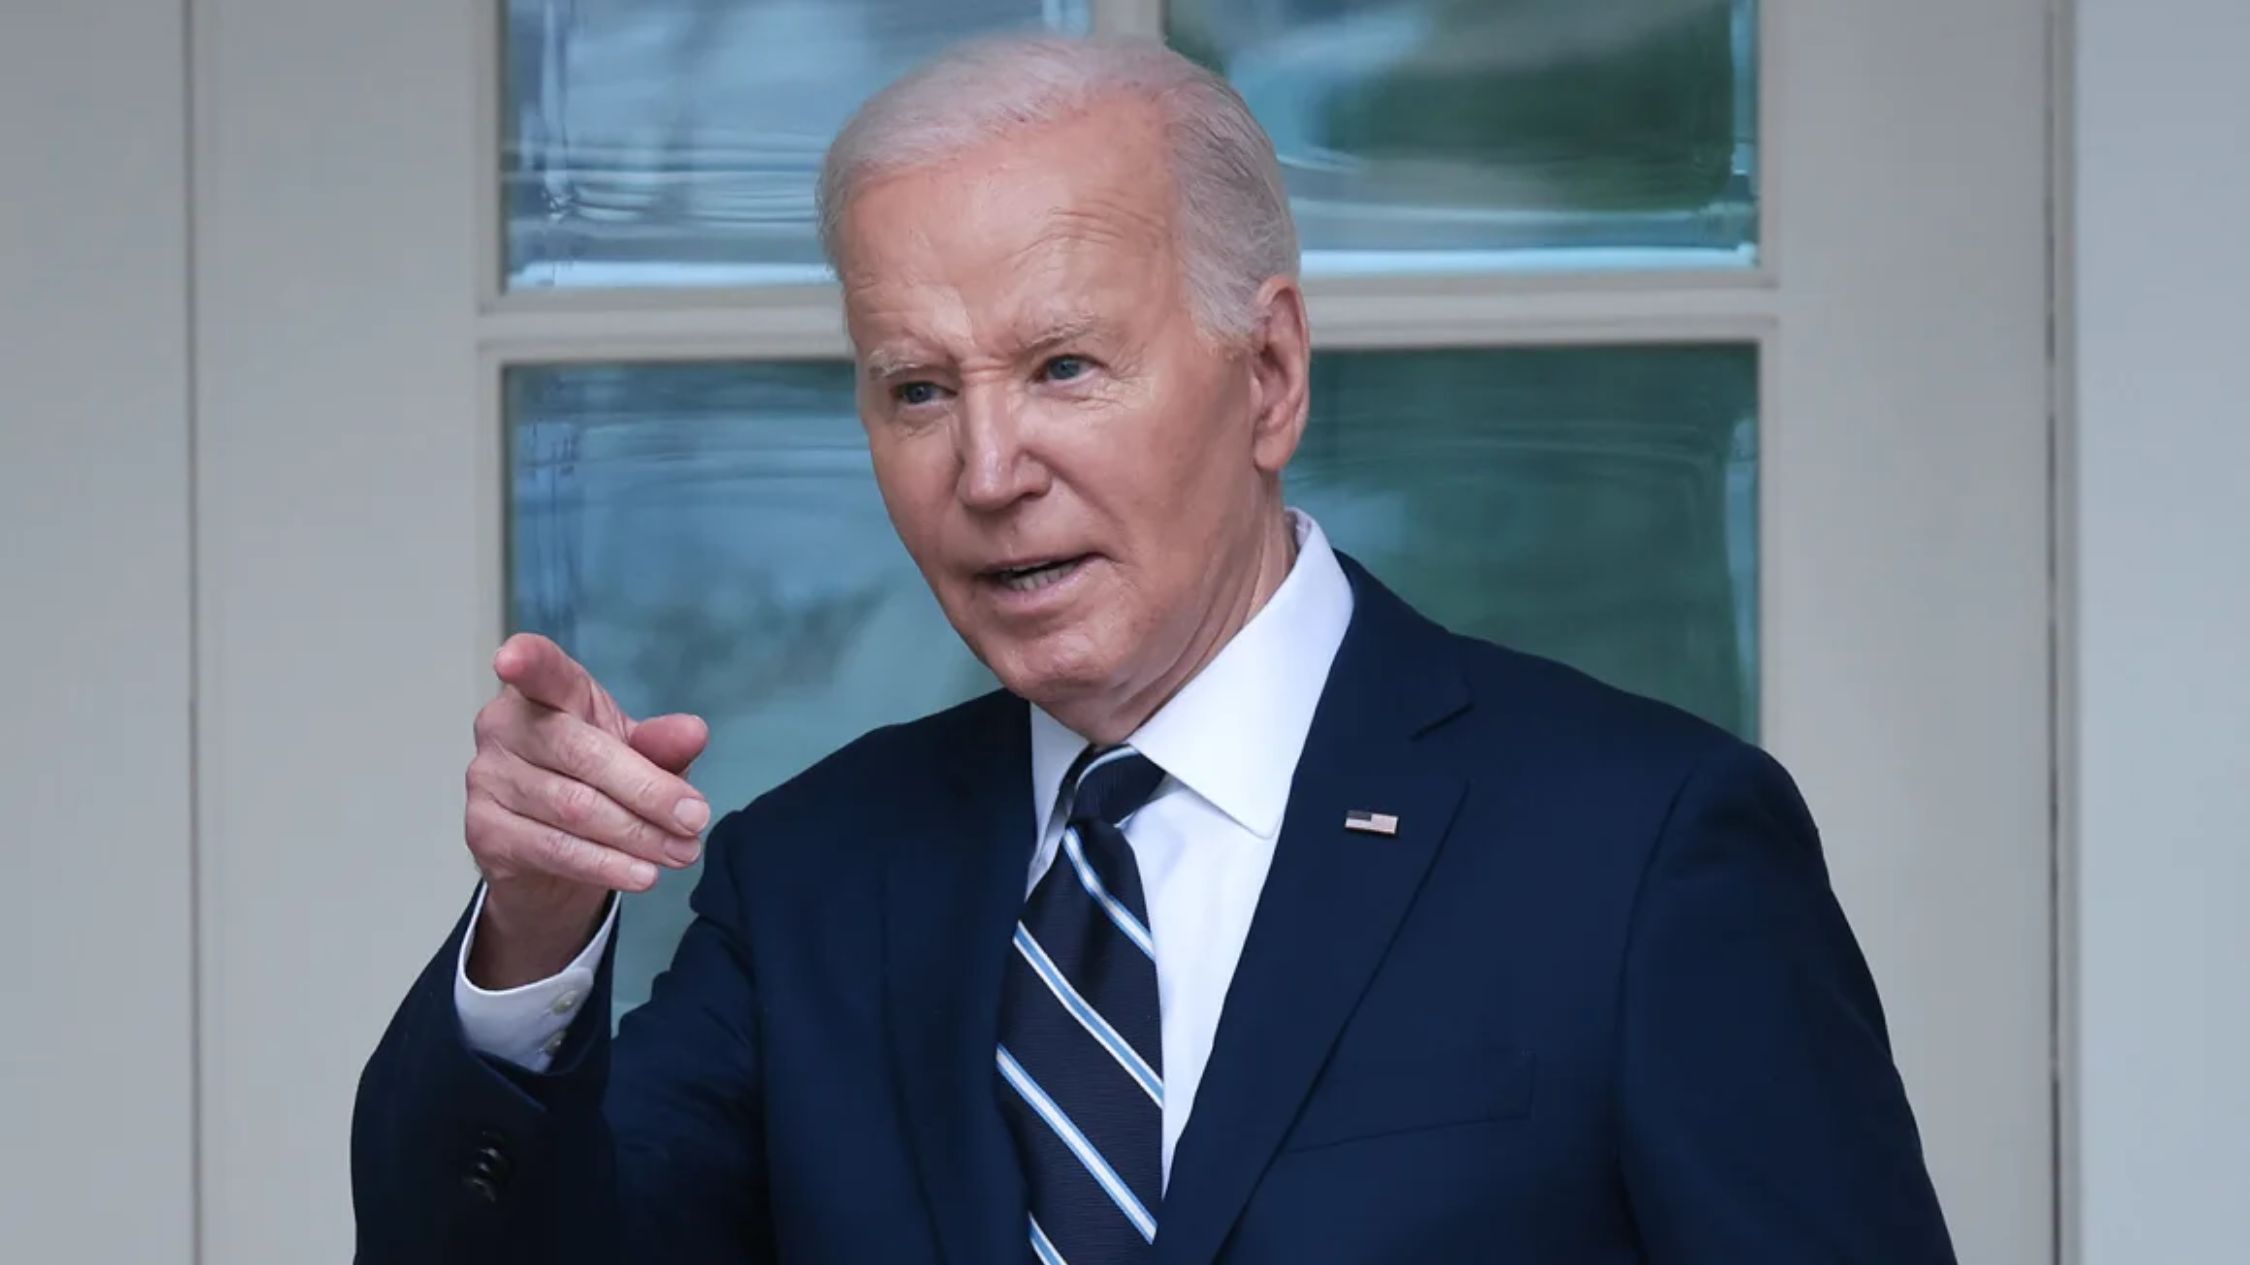 Biden criticizes ICC for equating Israel and Hamas